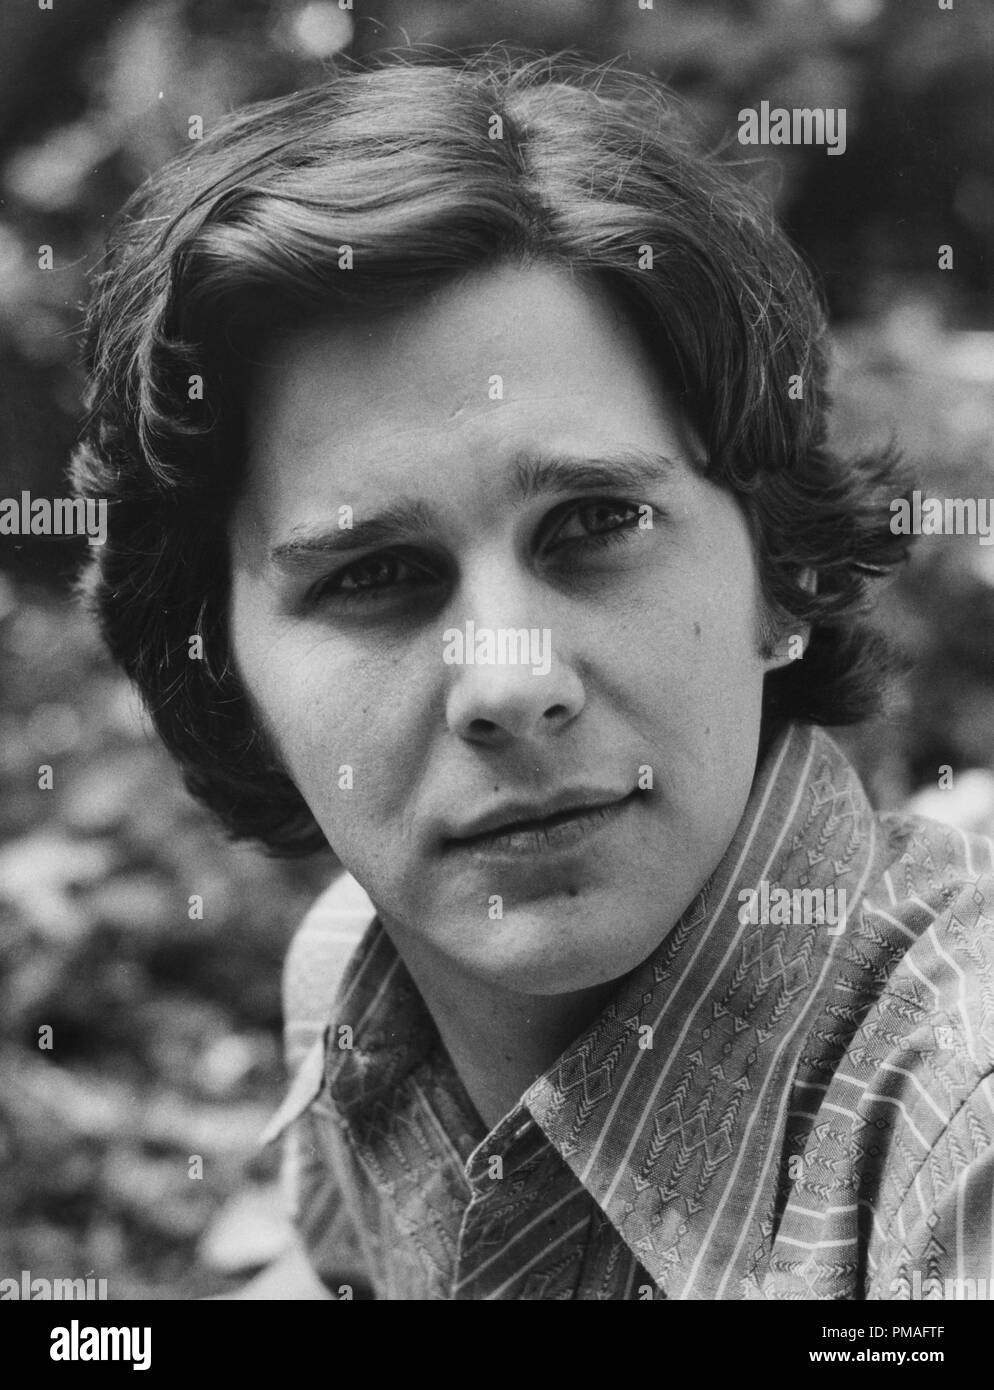 tim-matheson-circa-1972-jrc-the-hollywood-archive-all-rights-reserved-file-reference-32633-795jrc-PMAFTF.jpg